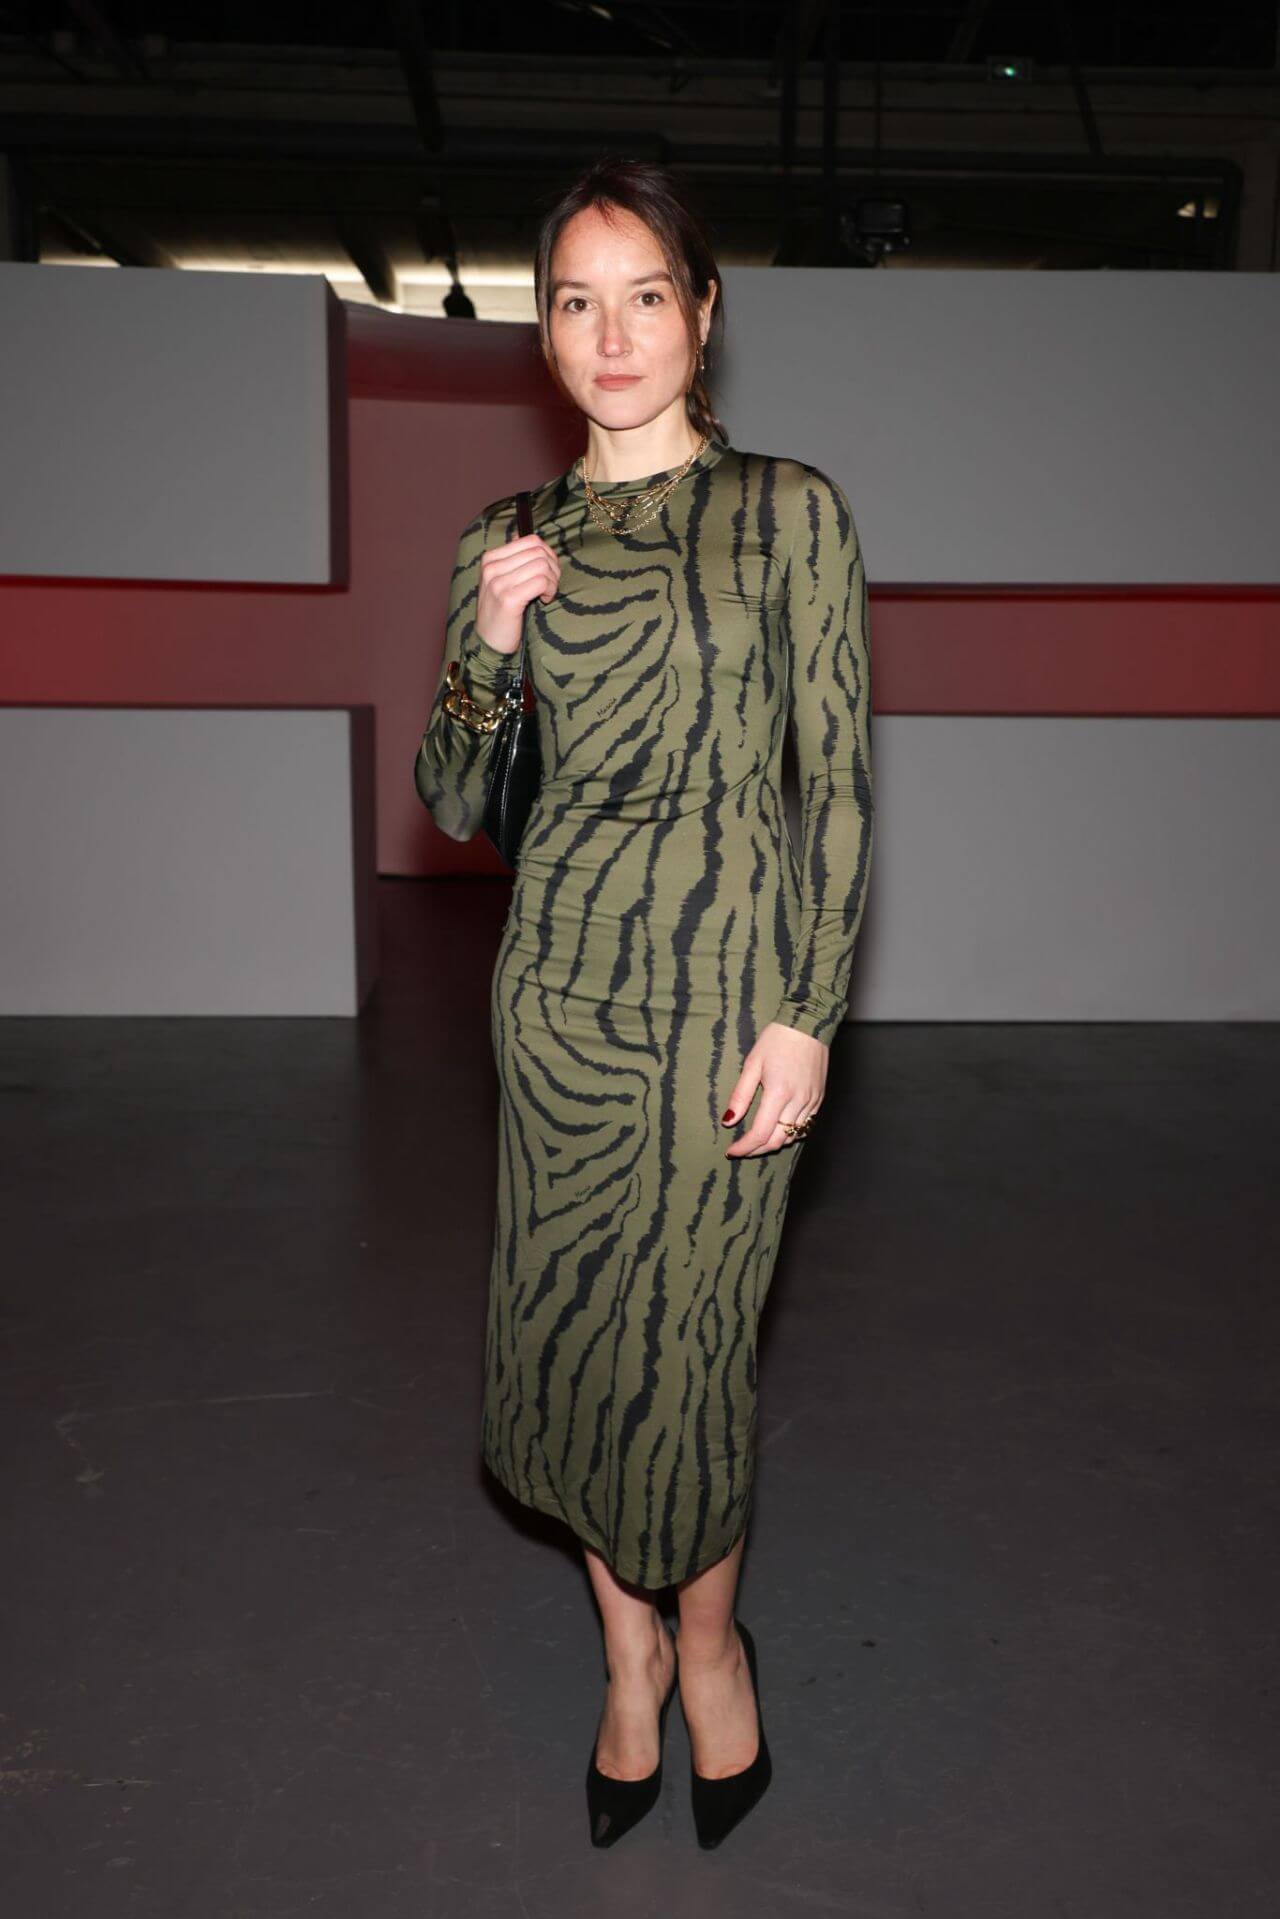 Anaïs Demoustier In Olive Green Printed Long Dress At Marcia Fashion Show in Paris